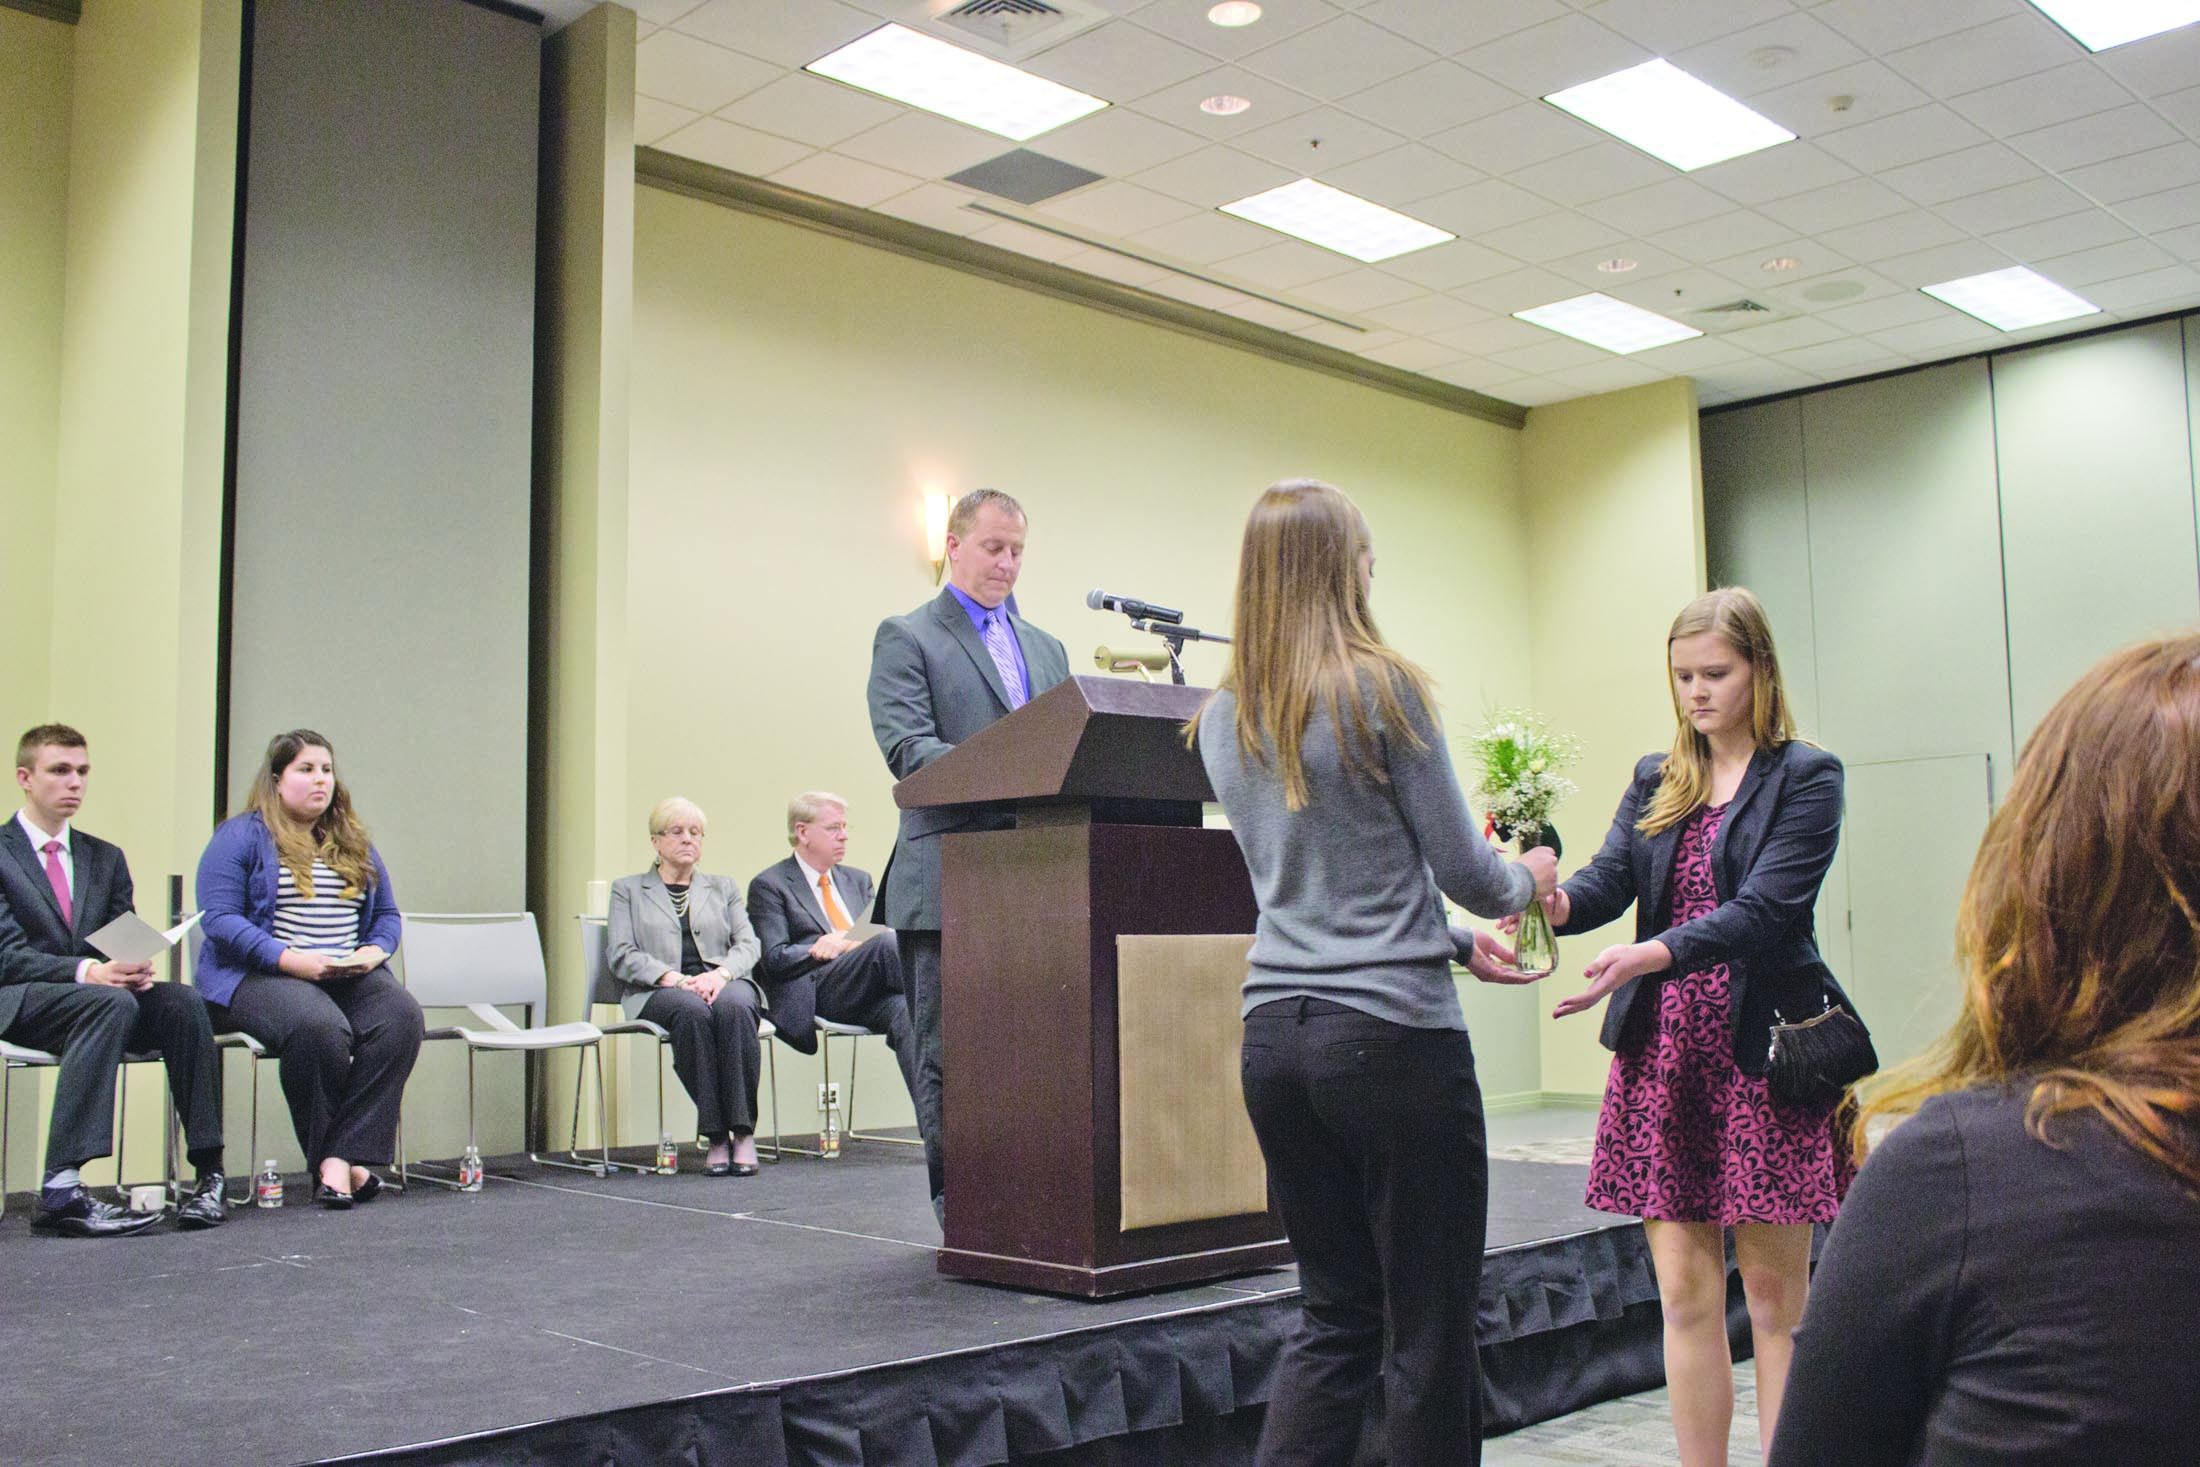 Students honored, memorialized